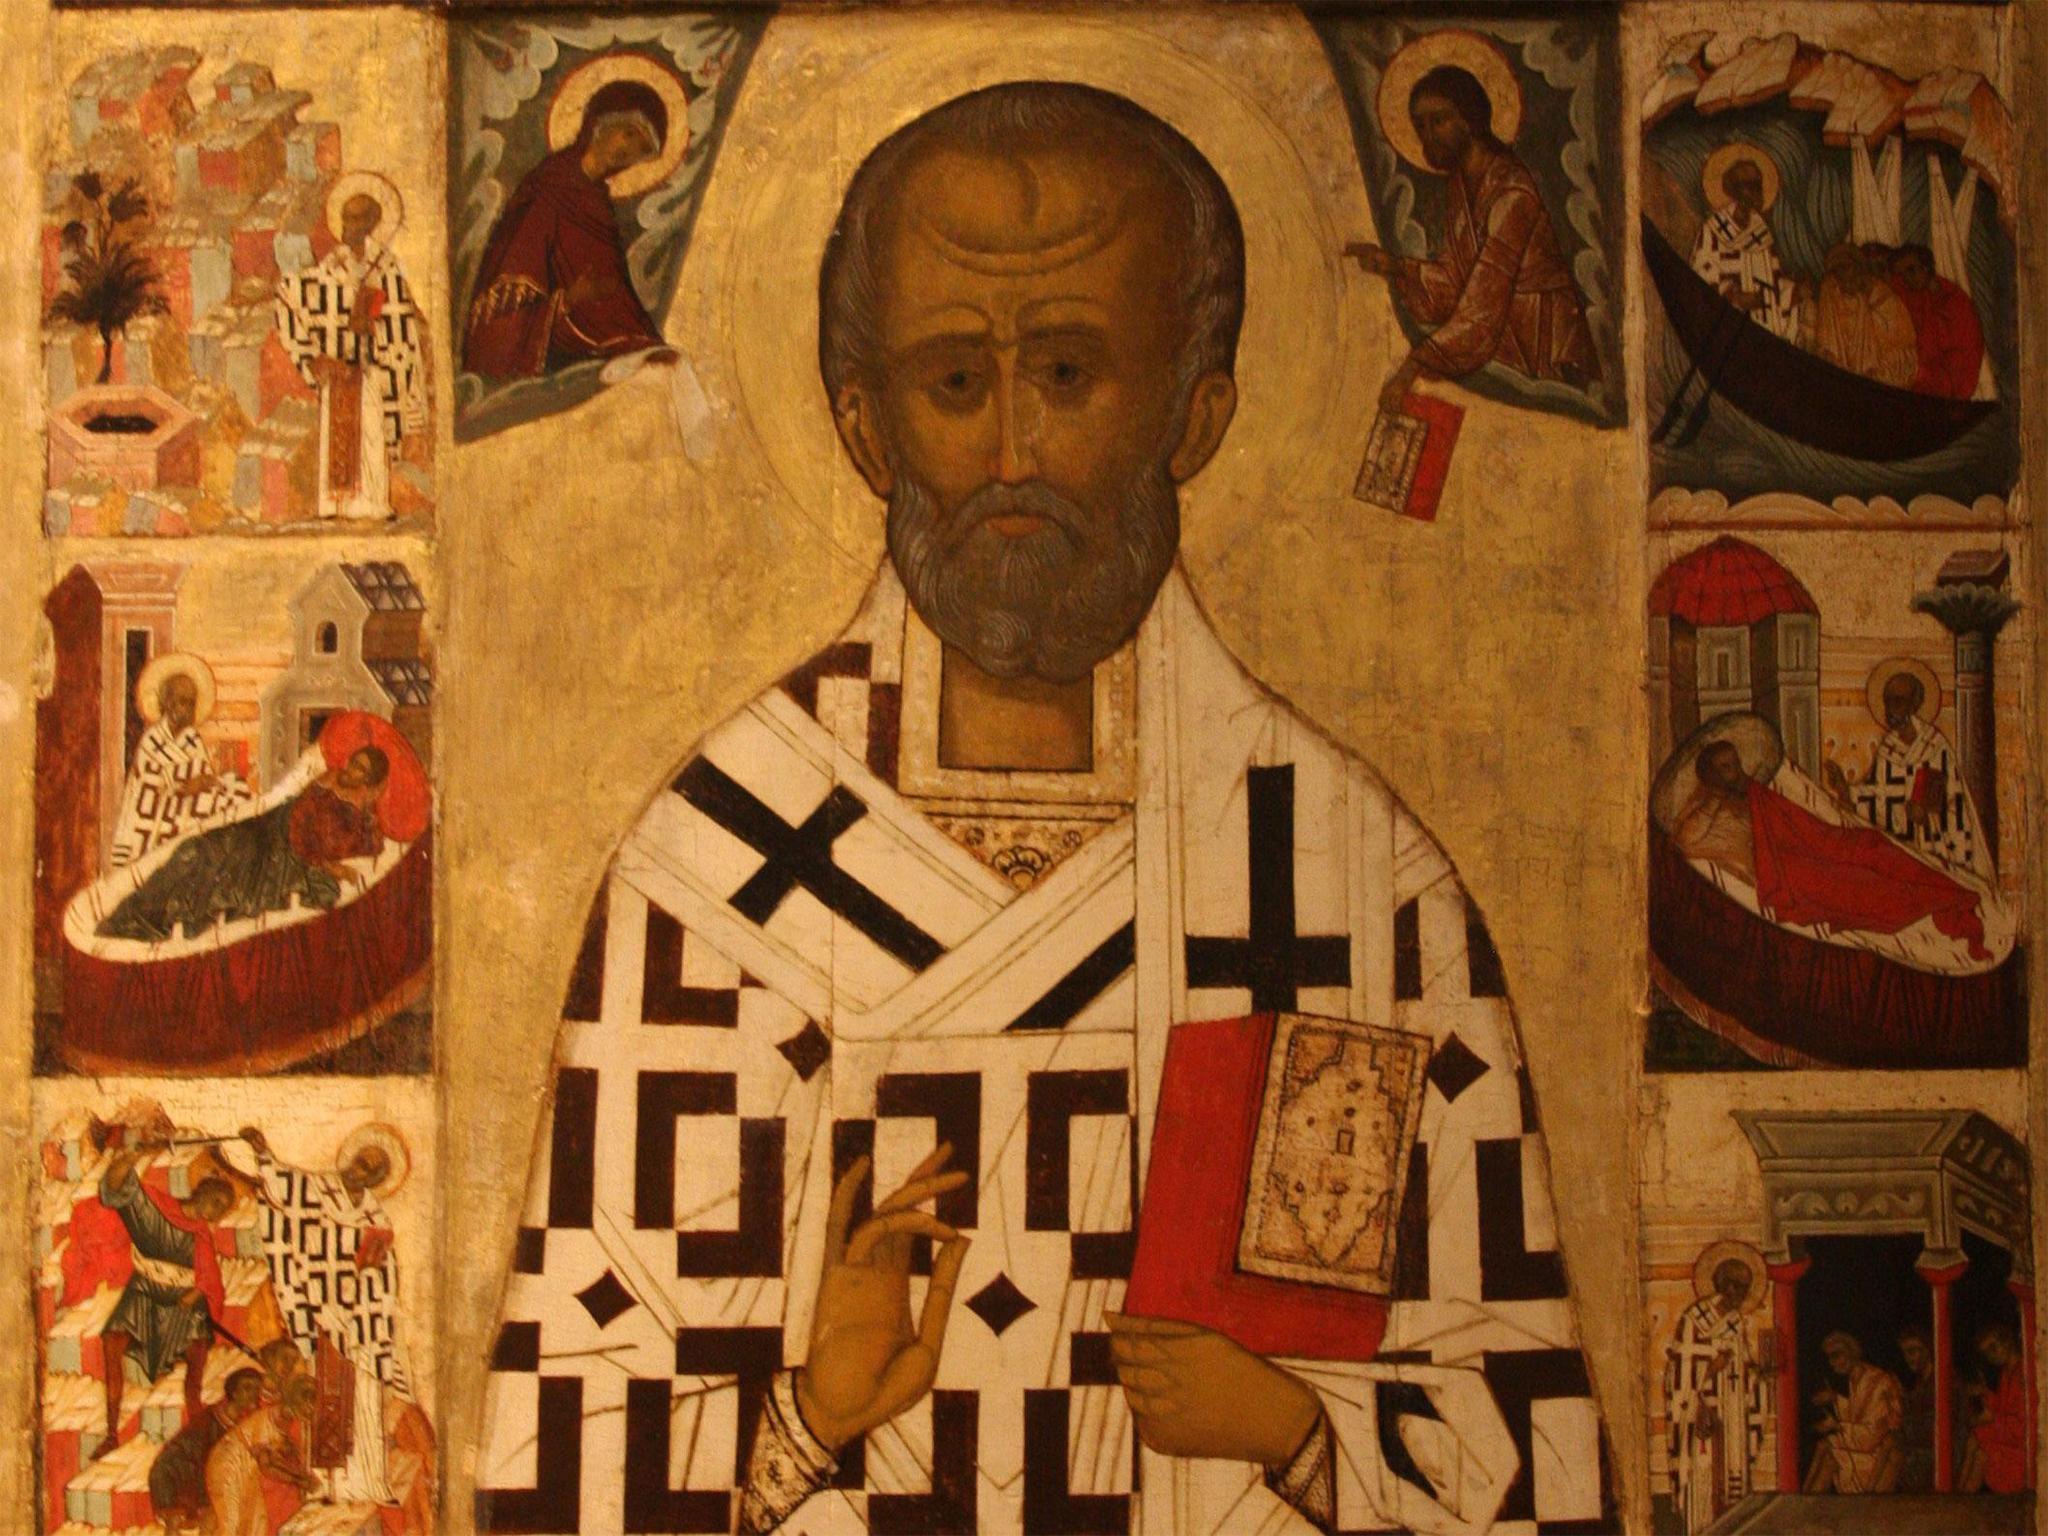 Saint Nicholas was also known as the Wonderworker because of his miracle intercessions